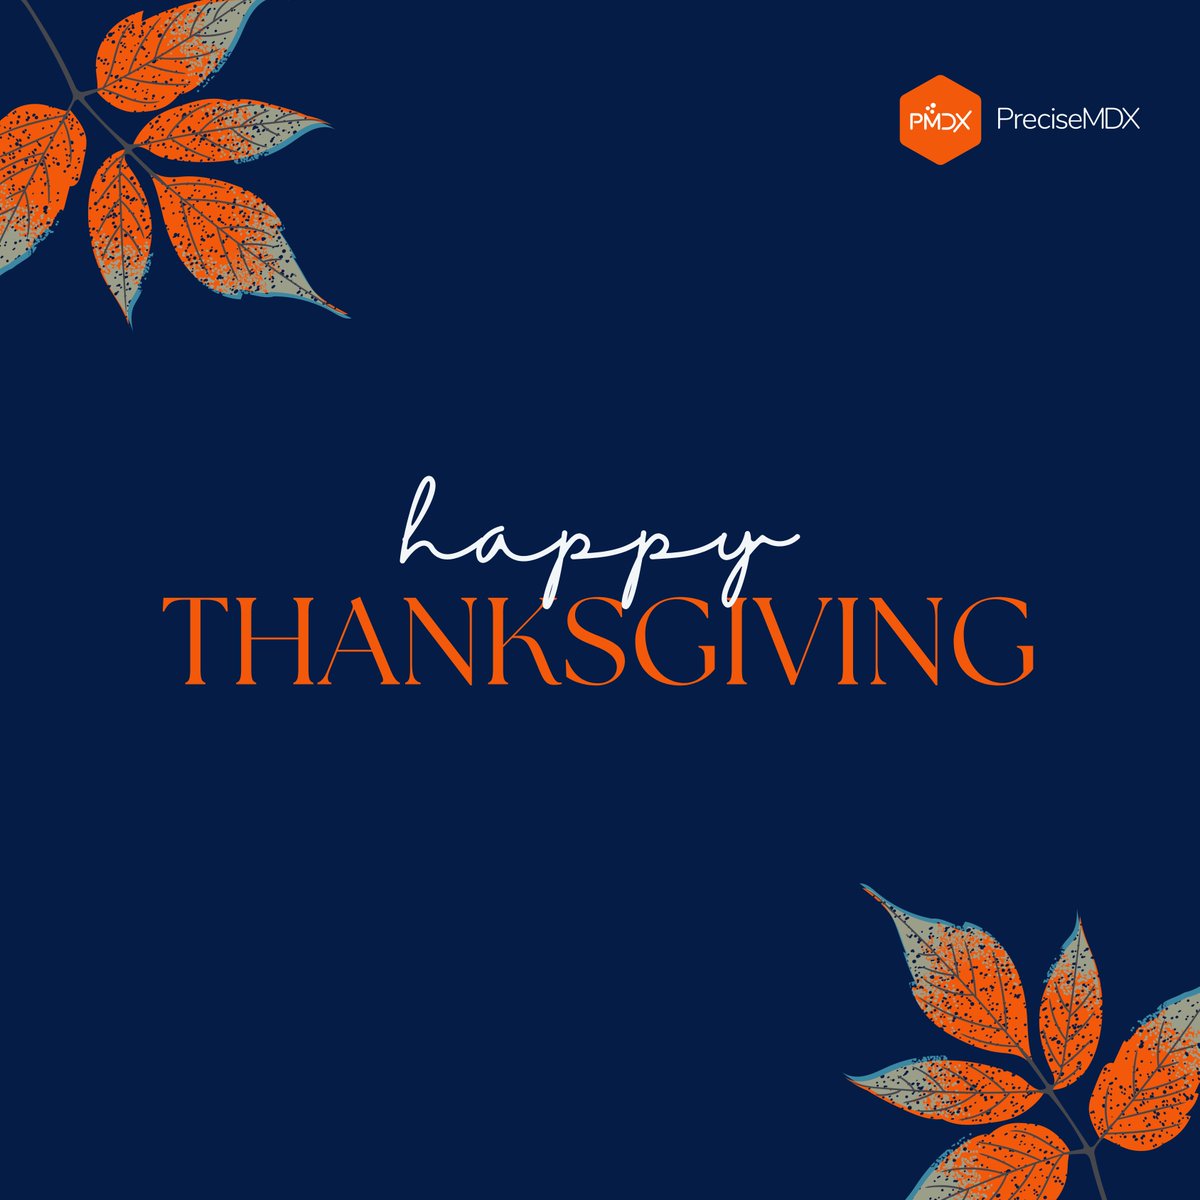 Wishing you a Happy Thanksgiving from all of us at PreciseMDX! May your day be filled with gratitude, joy, and warm moments with loved ones.

#PreciseMDX #labs #clinical #lab #labtech #labtesting #lbms #healthit #healthtech #digitalhealth #innovation #leadership